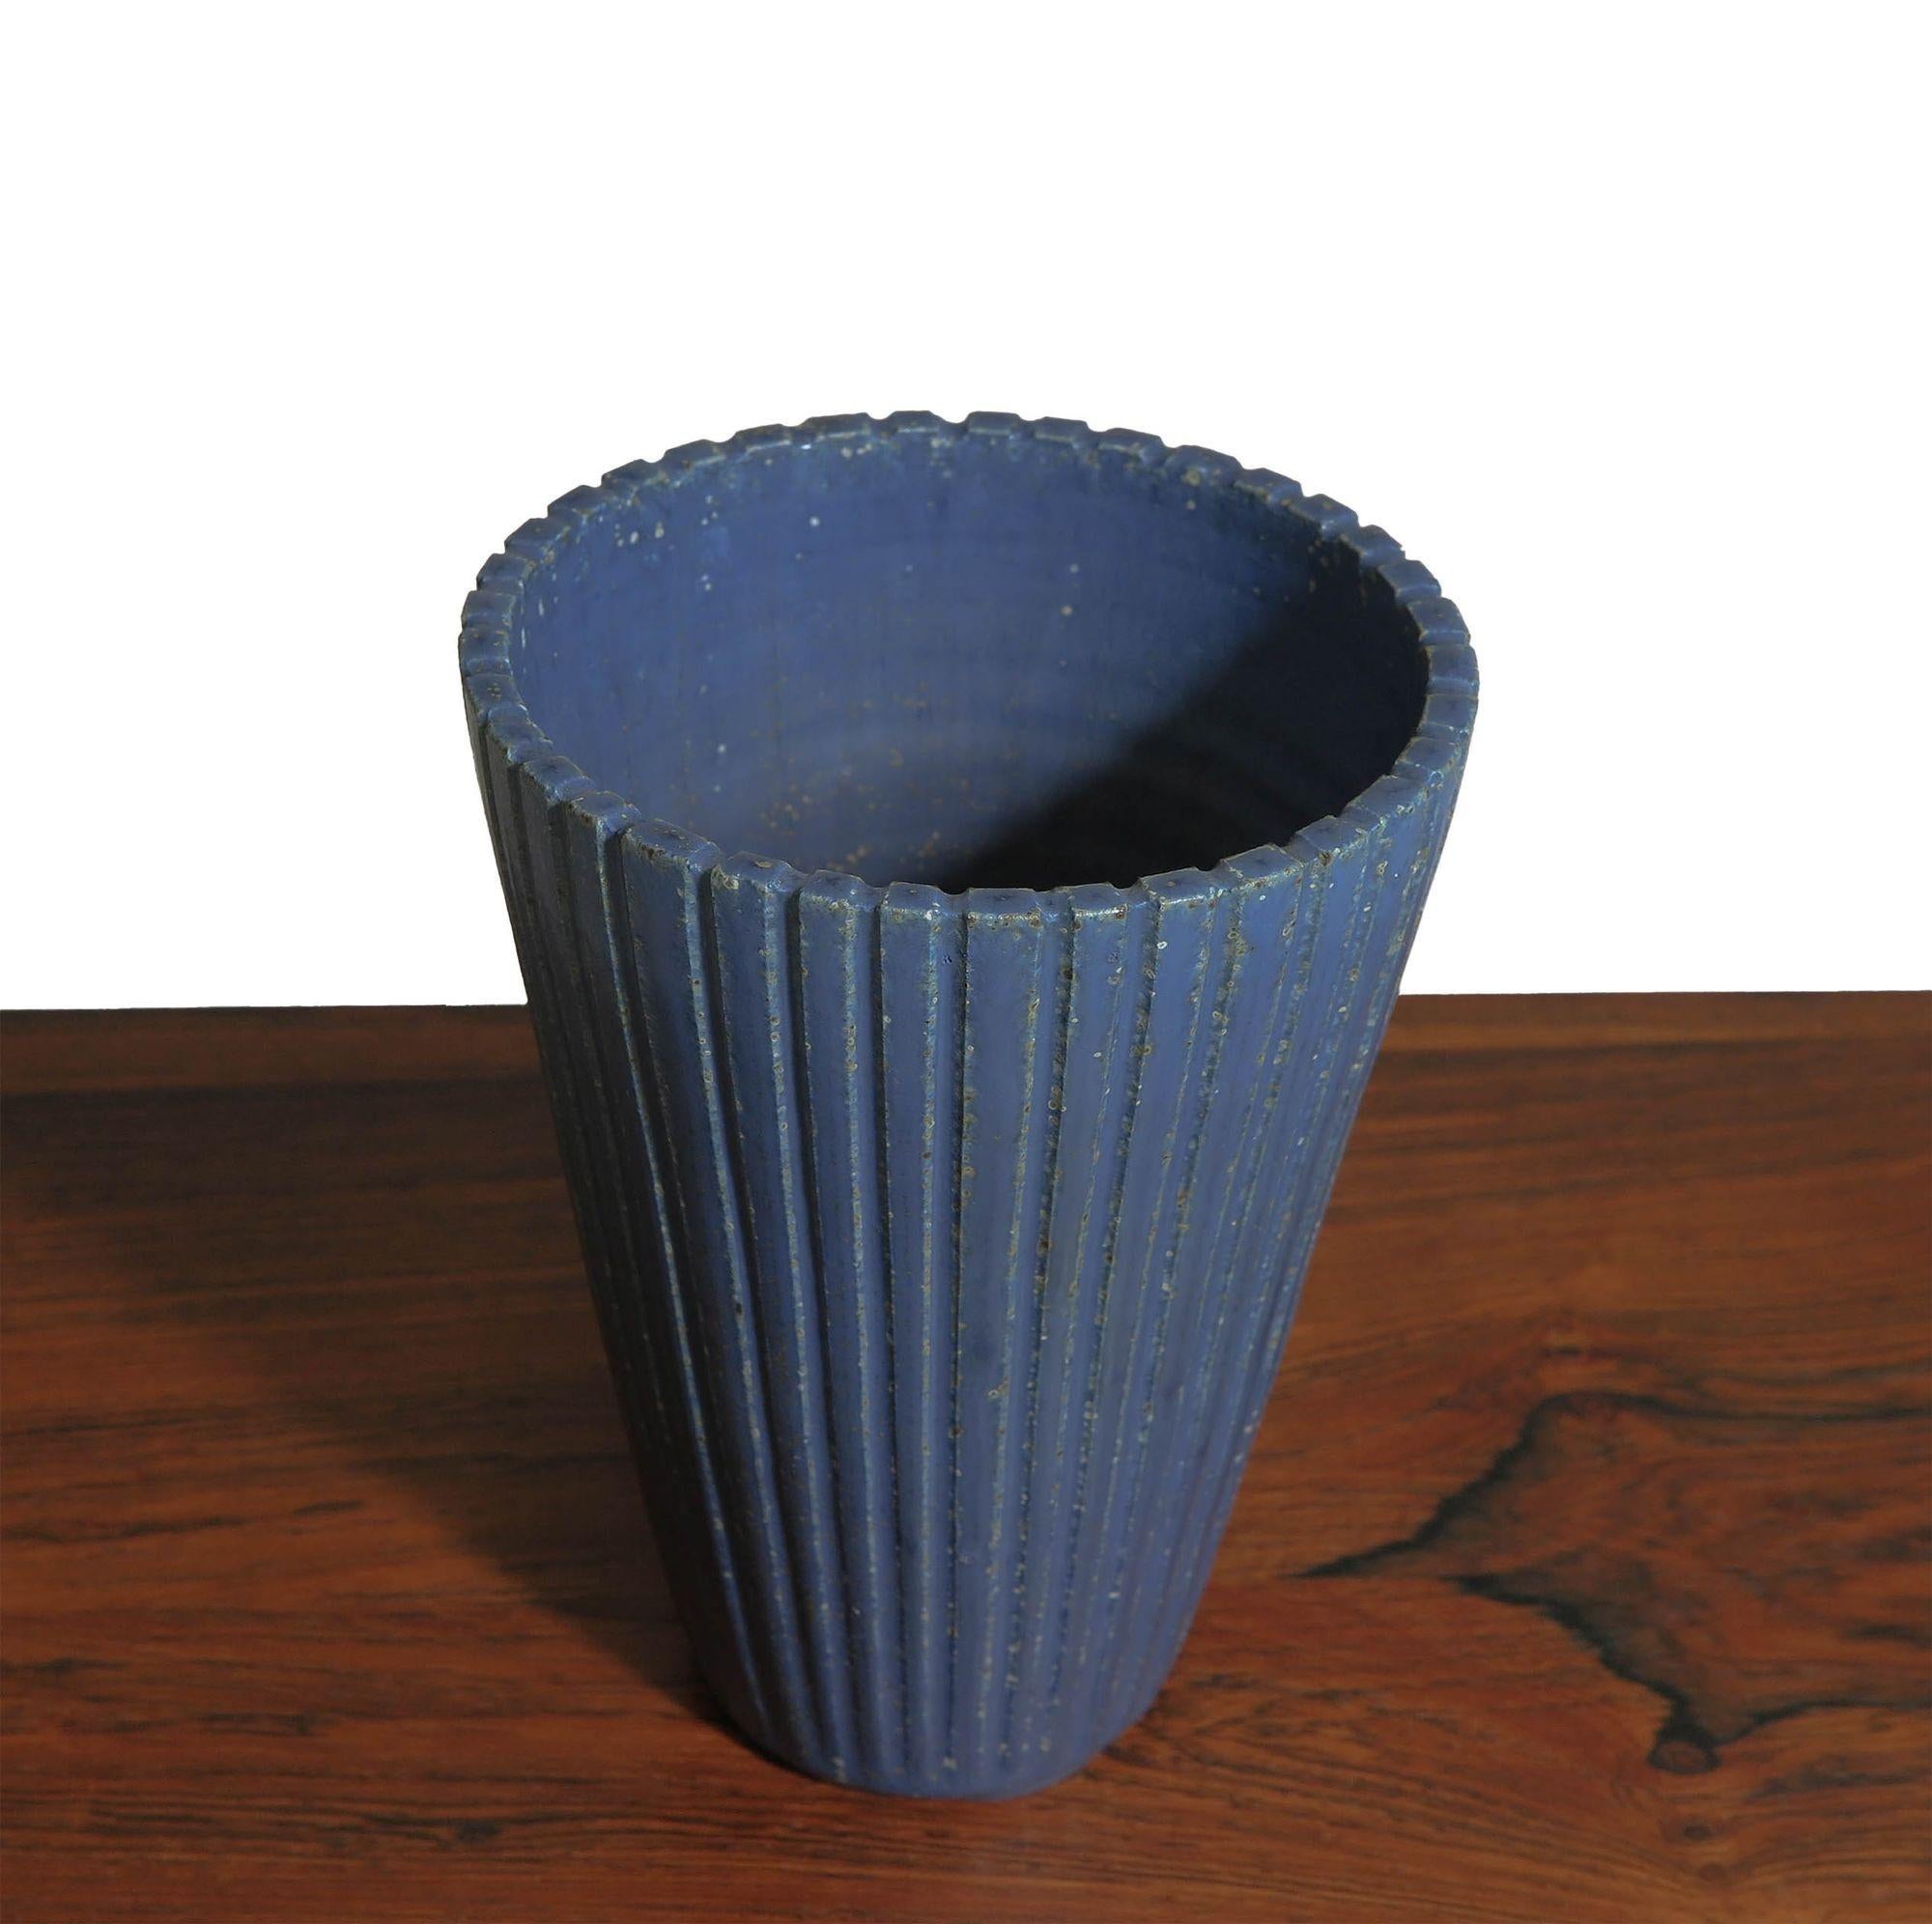 Arne Bang Danish Stoneware Ceramic Vase in Blue In Excellent Condition For Sale In Oakland, CA